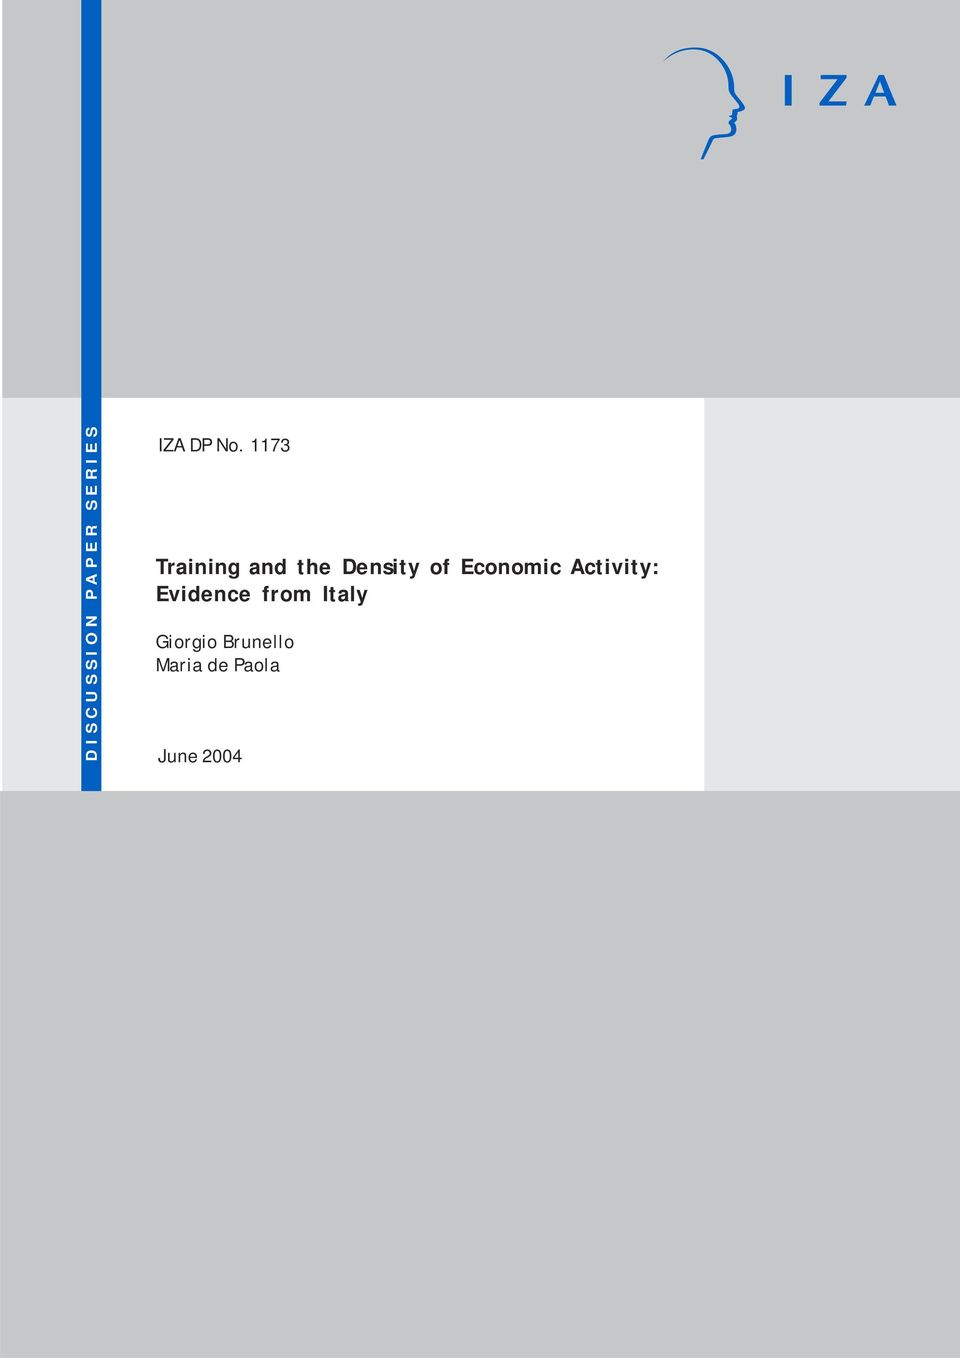 Economic Activity: Evidence from